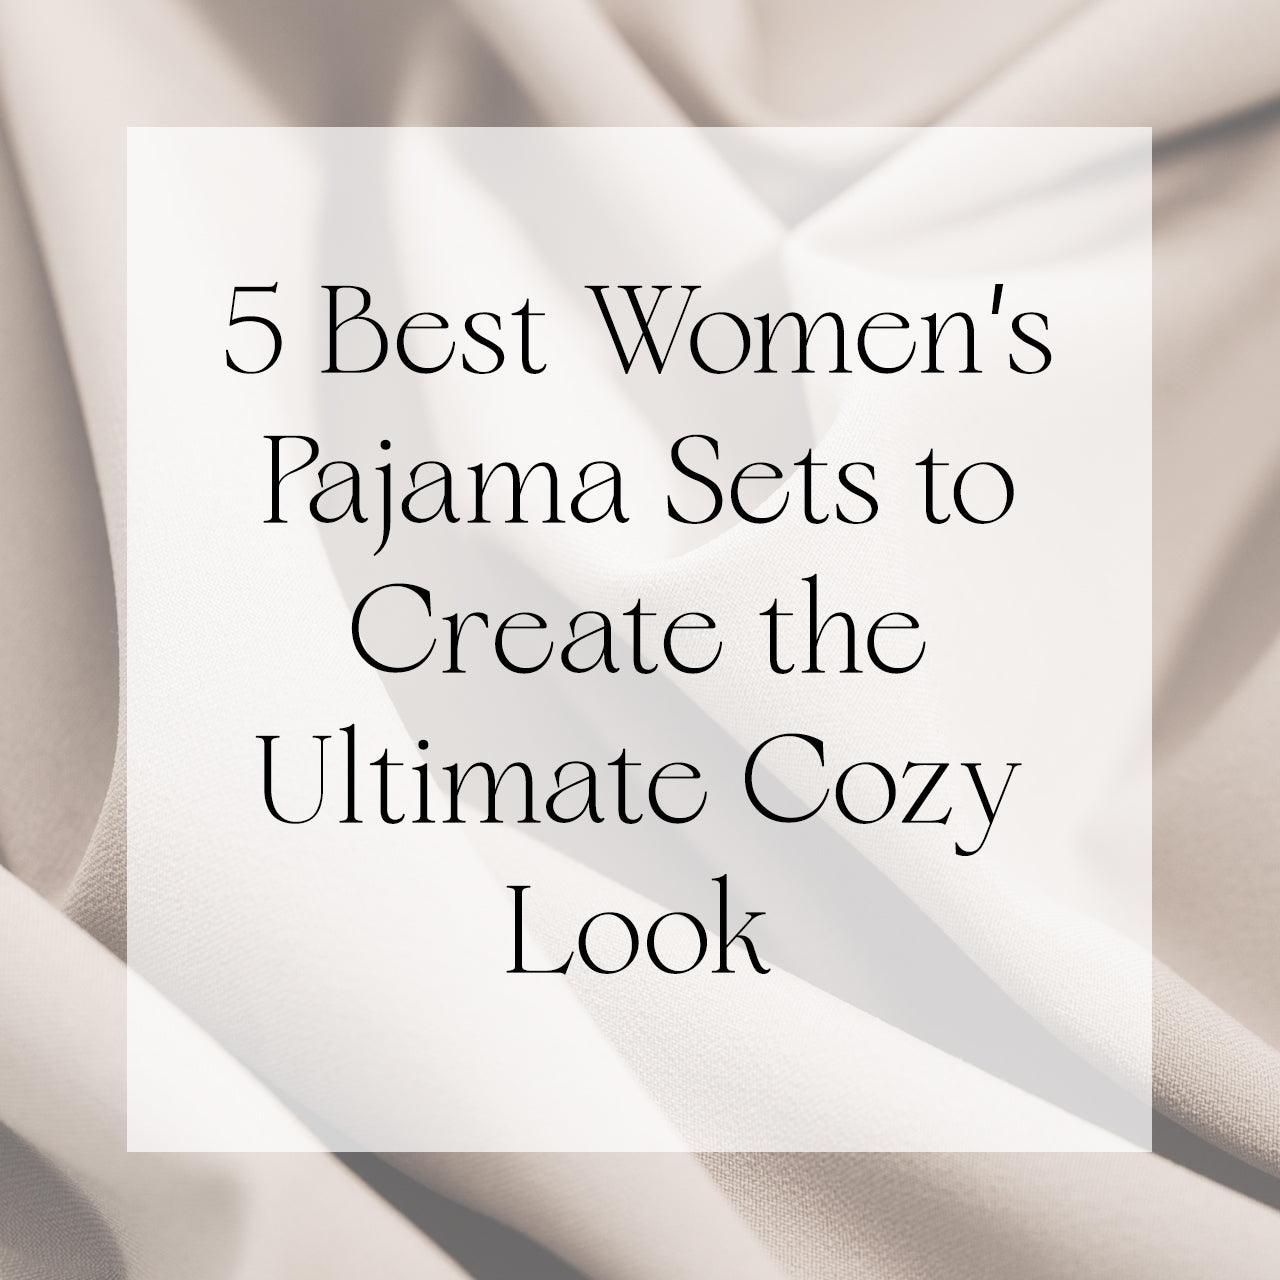 5 Best Women's Pajama Sets to Create the Ultimate Cozy Look - Singhvis